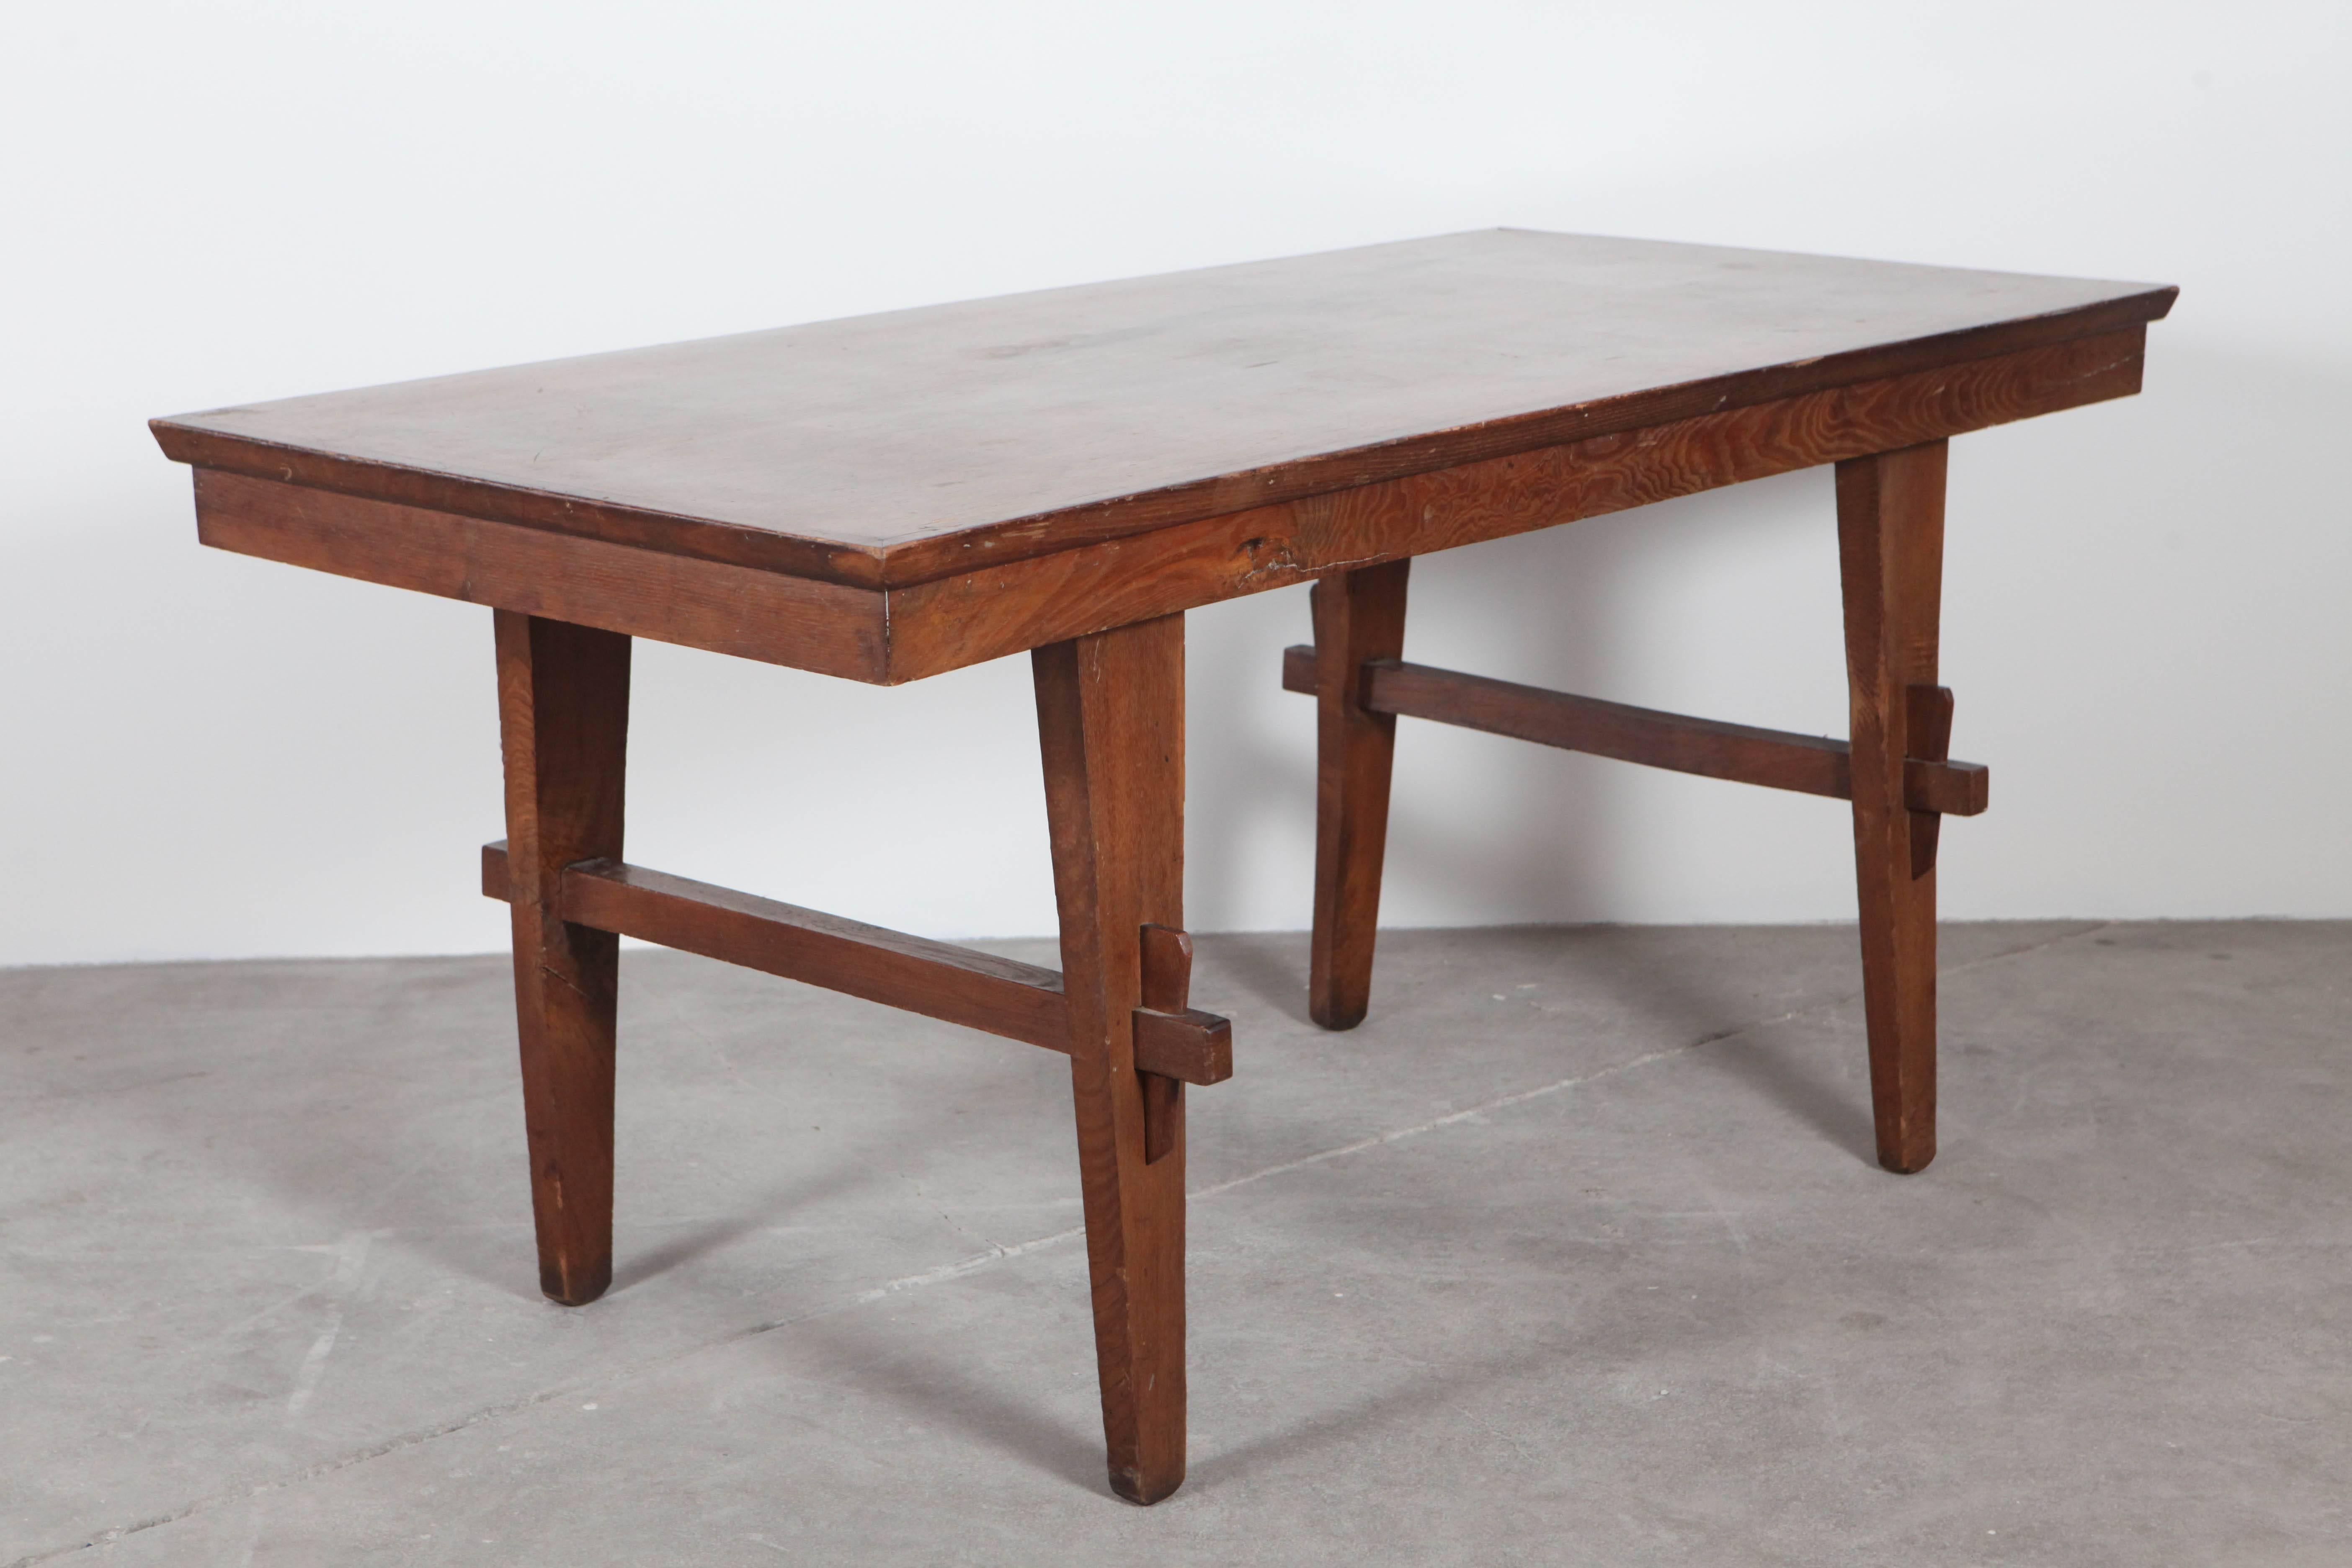 Mid-20th Century Italian Dining Table with Peg Hold Legs